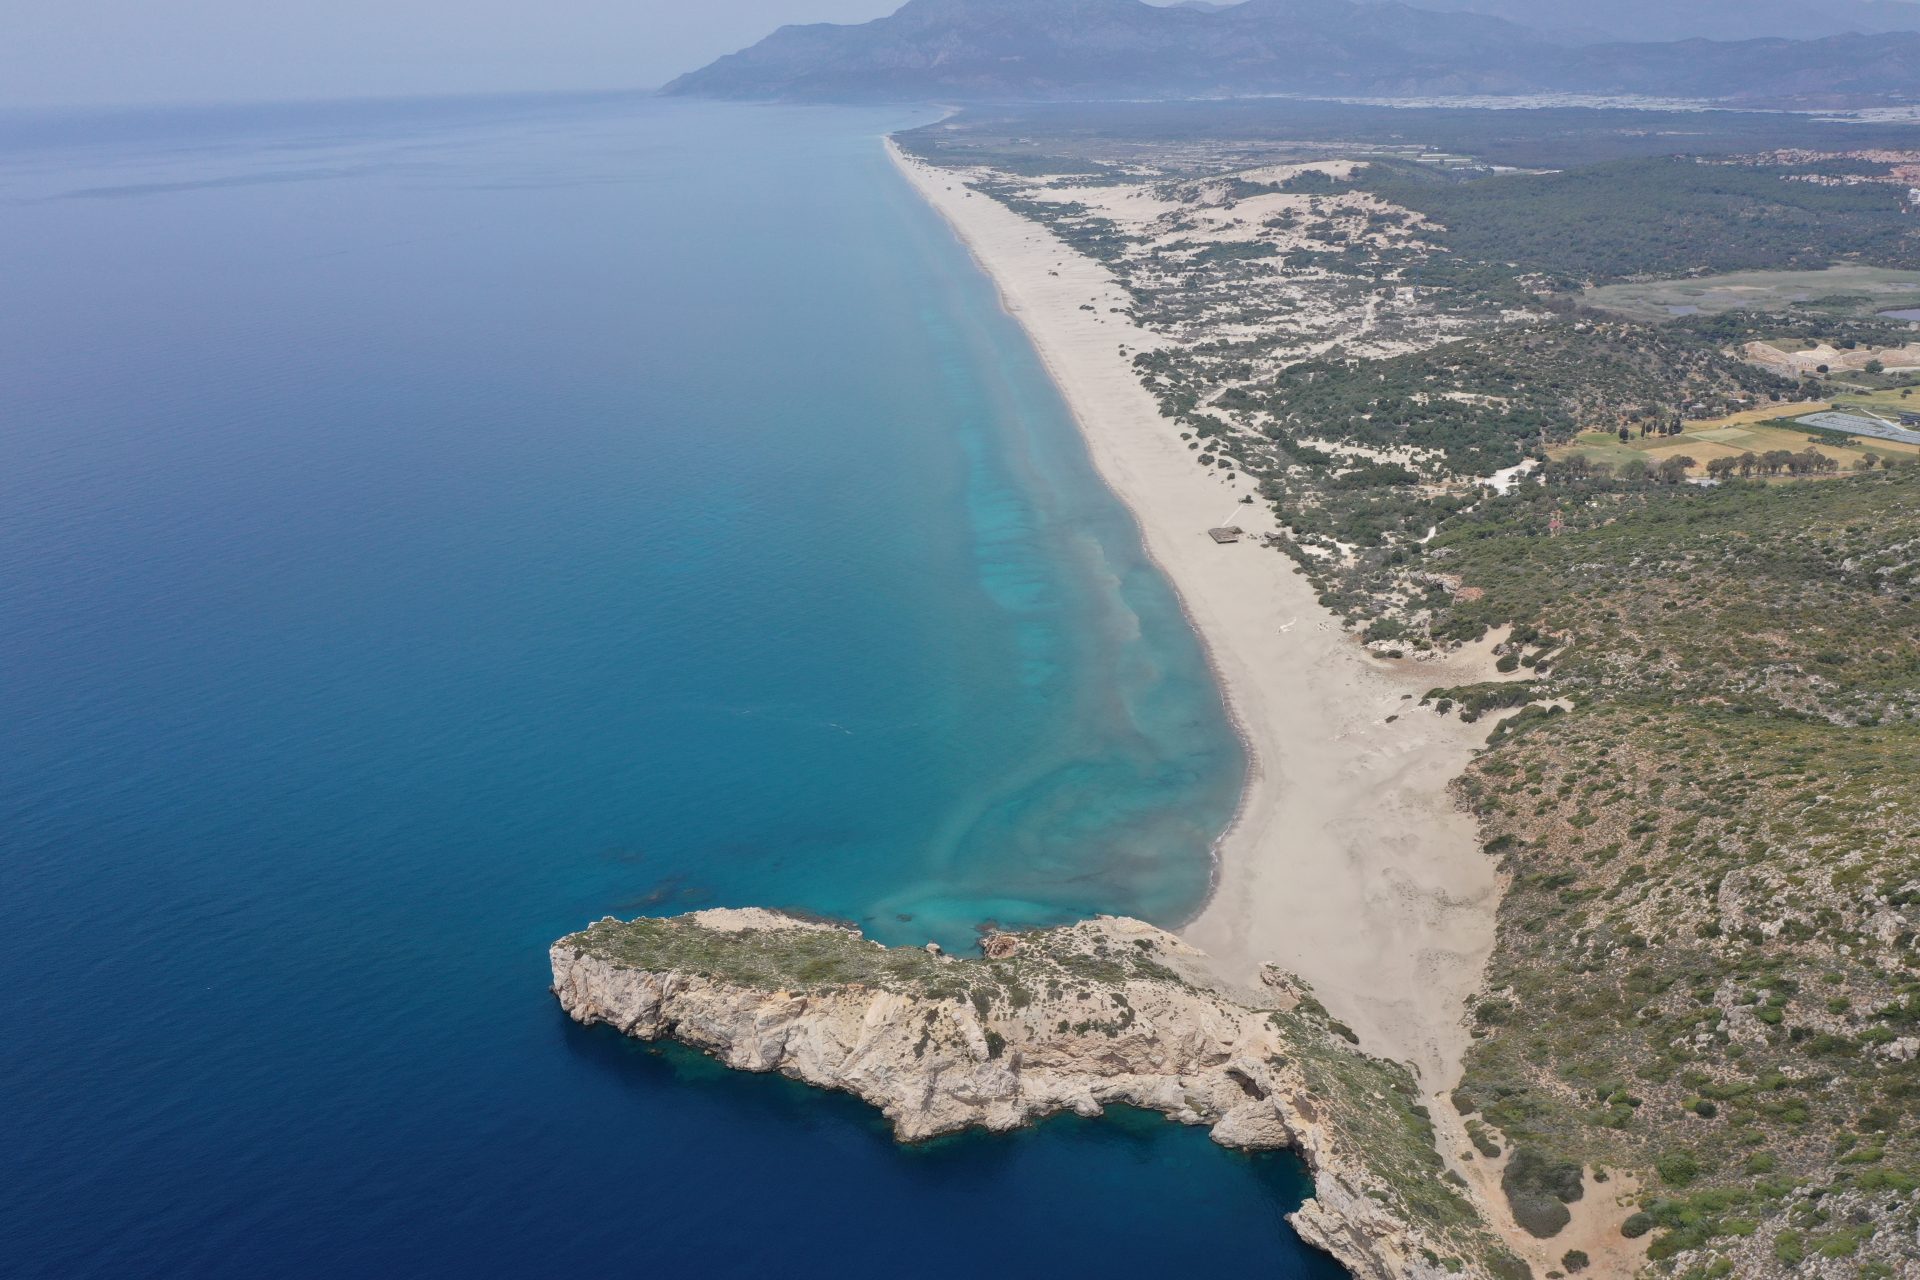 <p>With approximately 20 kilometers (12.5 miles) of sand, Patara has the longest and best-preserved beach in Turkey. Near the beach are the ruins of the ancient Lycian city of Patara, which was said to have been built by the son of Apollo.</p>